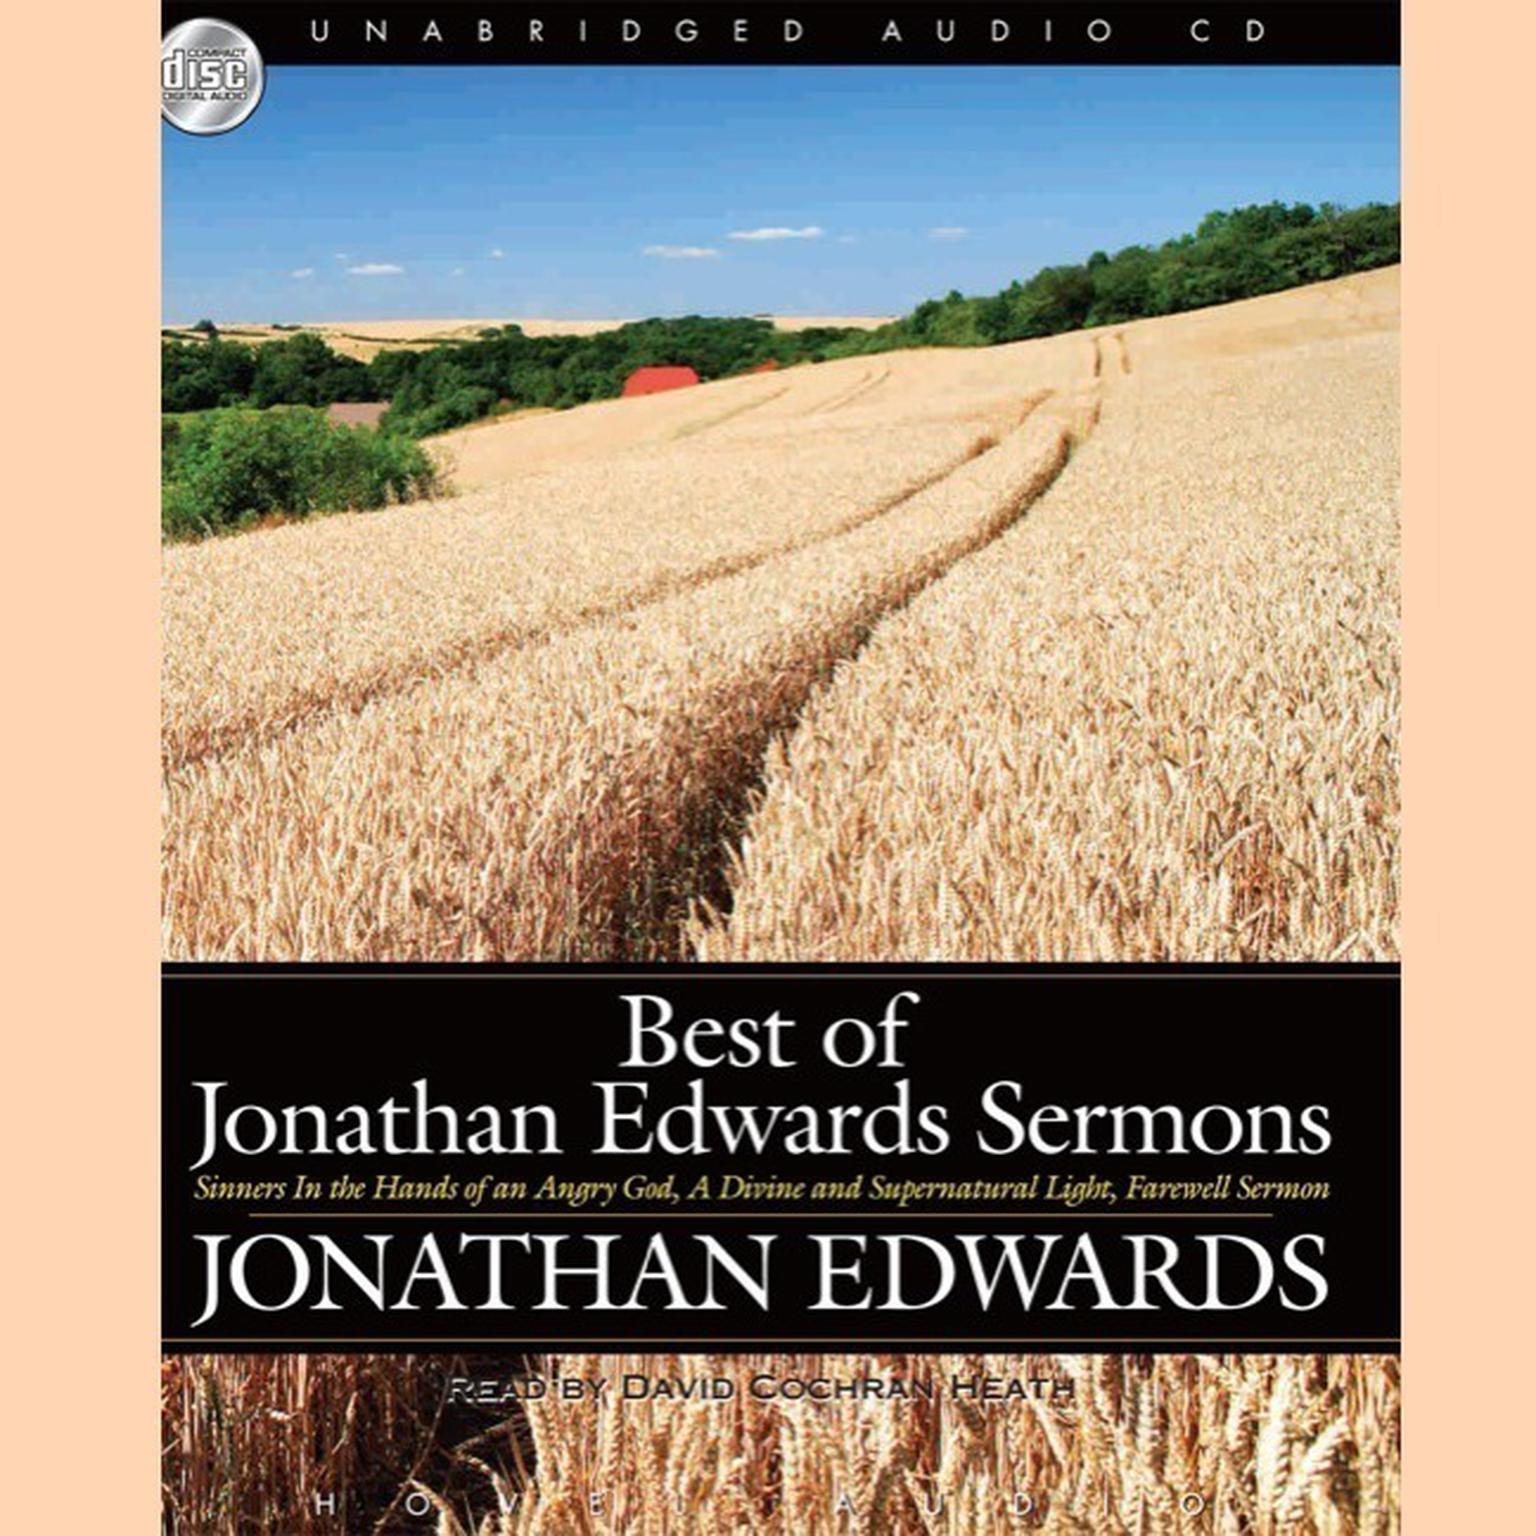 Best of Jonathan Edwards Sermons: Sinners in the Hands of an Angry God, A Divine and Supernatural Light, and Farewell Sermon Audiobook, by Jonathan Edwards